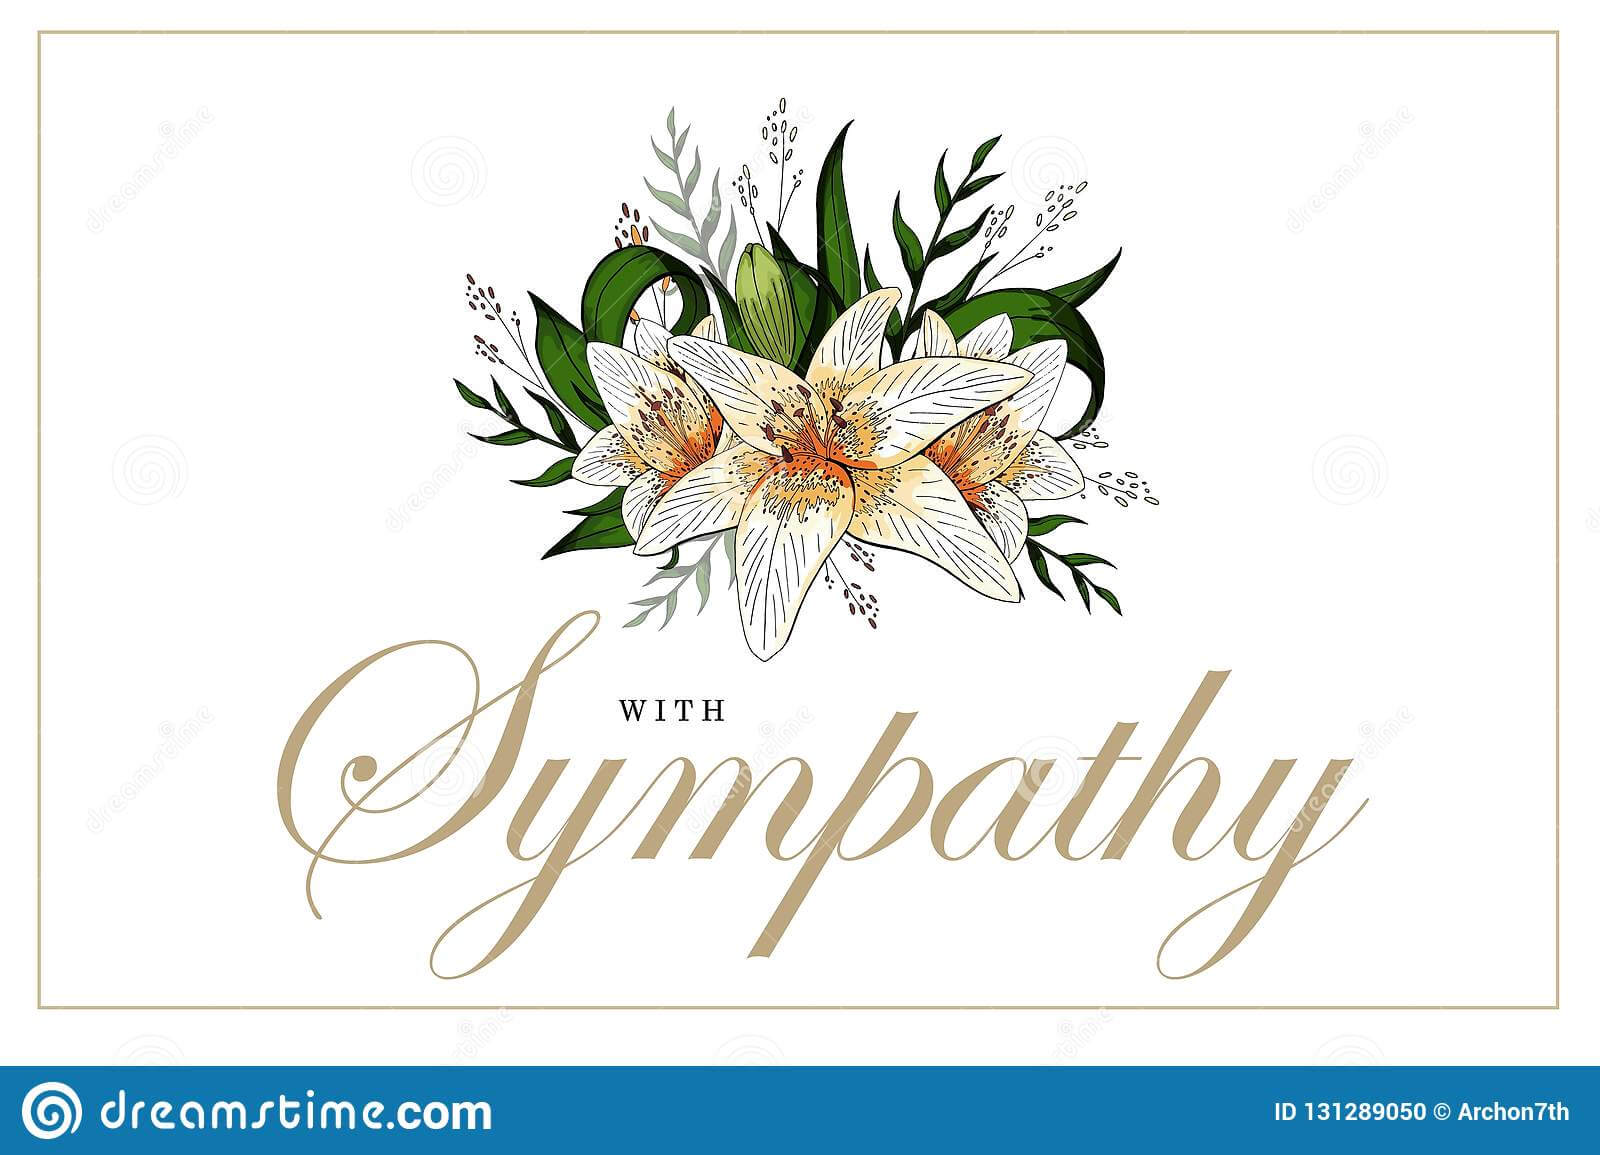 Condolences Sympathy Card Floral Lily Bouquet And Lettering Throughout Sorry For Your Loss Card Template